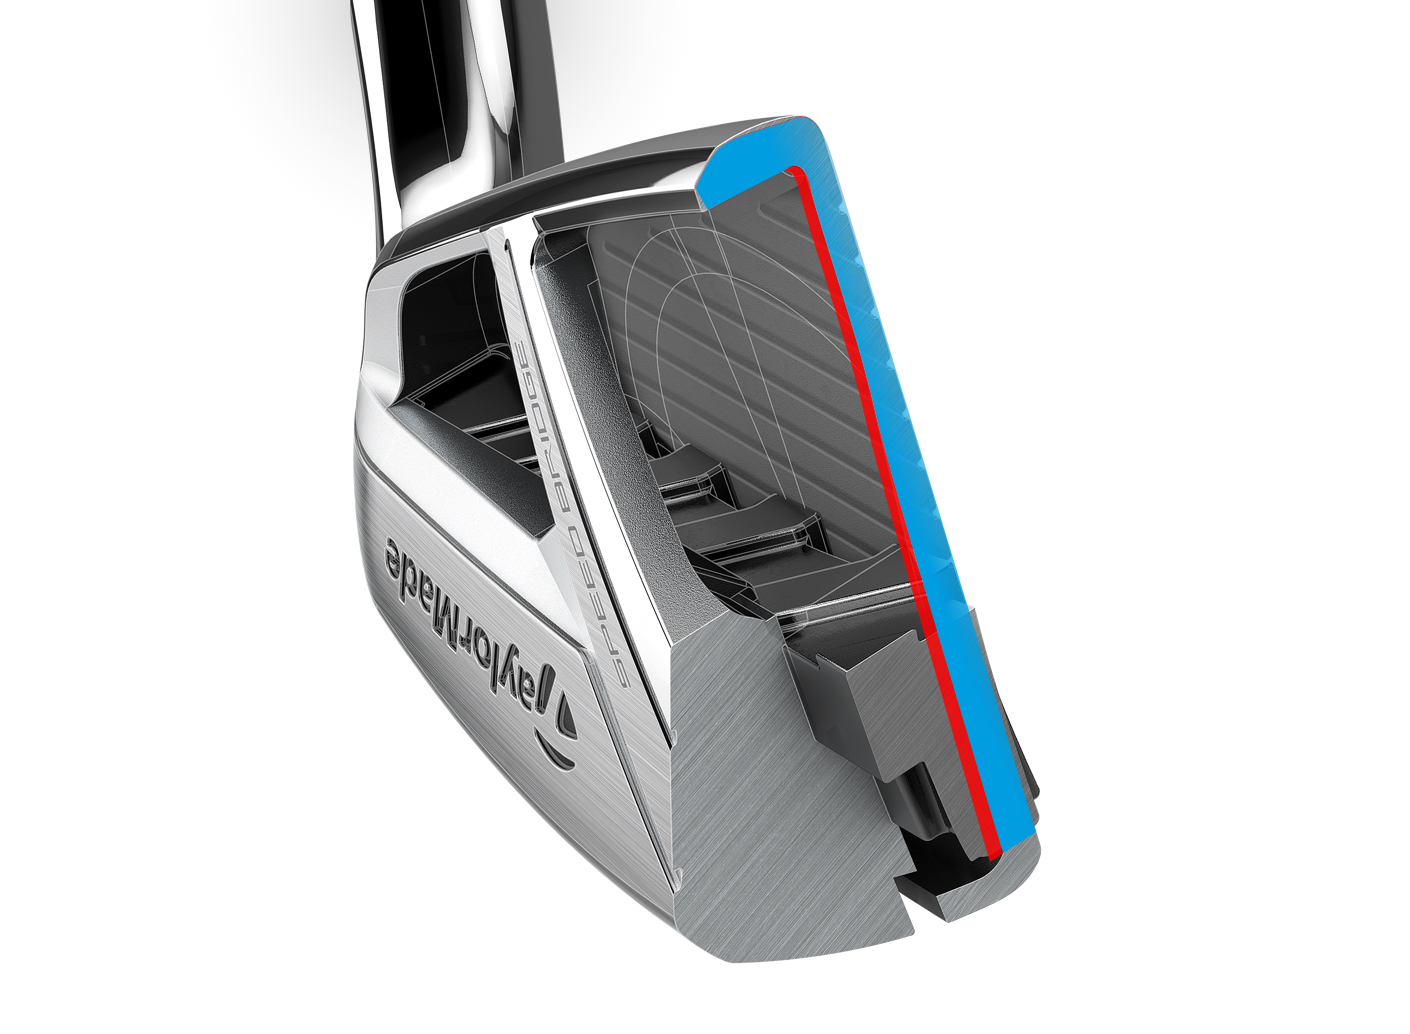 TaylorMade SIM Max and SIM Max OS irons - FIRST LOOK